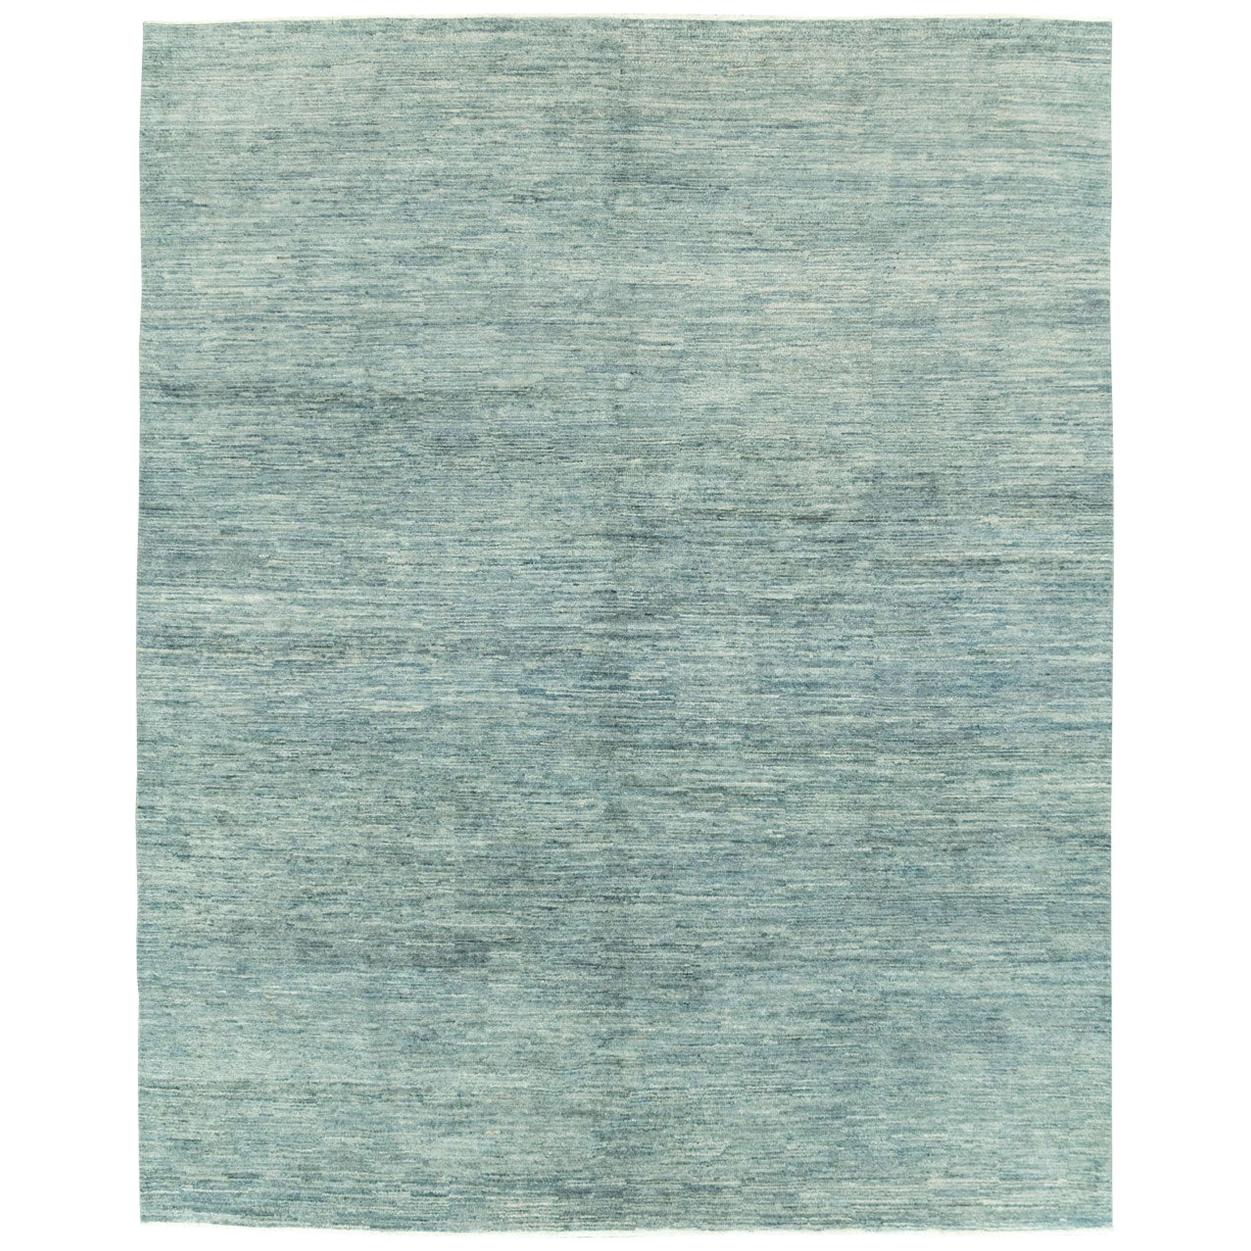 Contemporary Handmade Solid Patterned Turkish Room Size Carpet in Seafoam Green